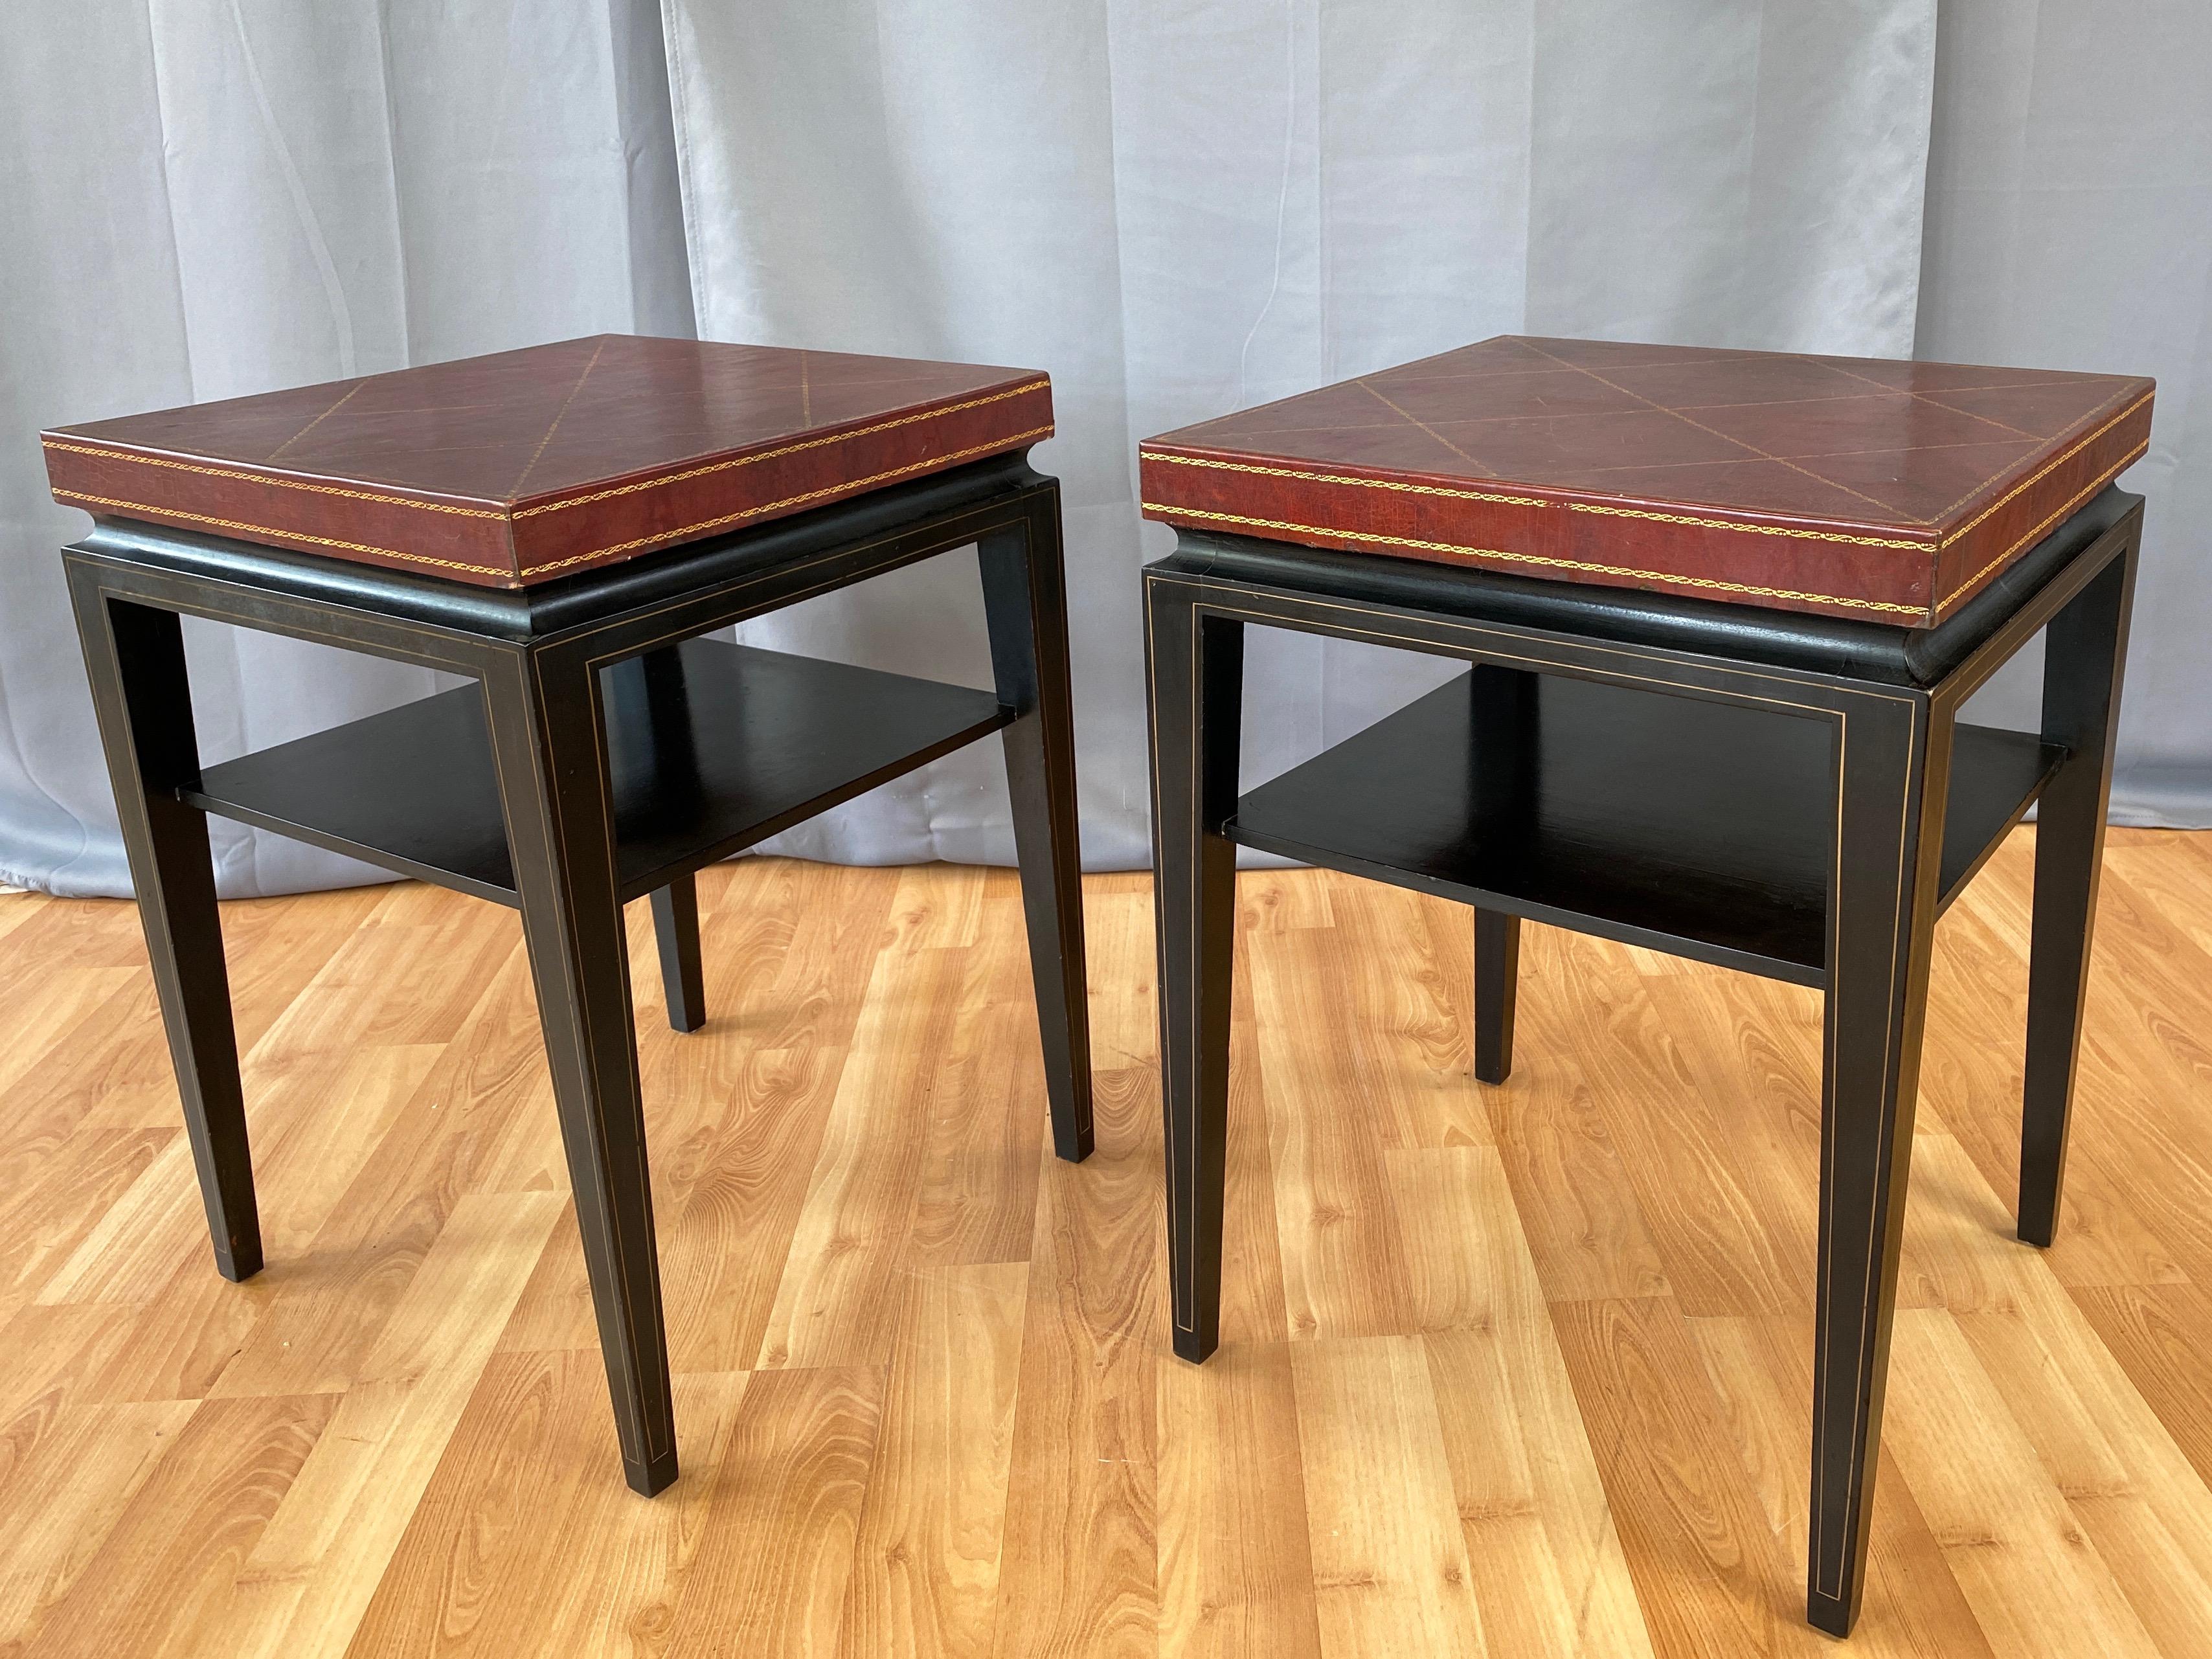 American Pair of Tommi Parzinger Leather Top Ebonized Mahogany Occasional Tables, 1950s